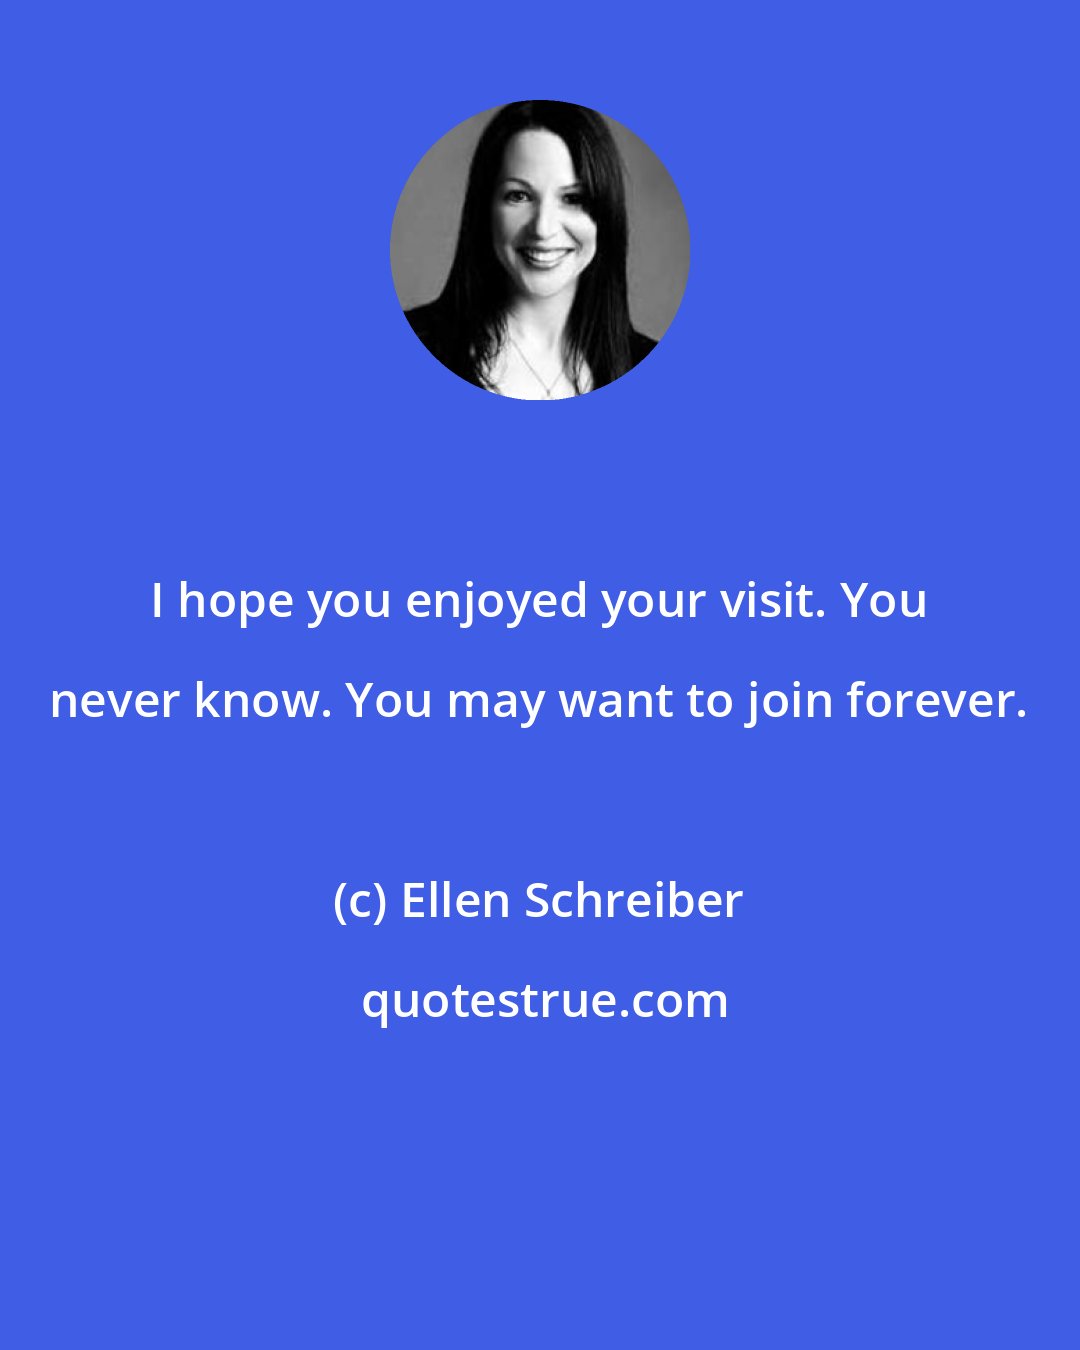 Ellen Schreiber: I hope you enjoyed your visit. You never know. You may want to join forever.